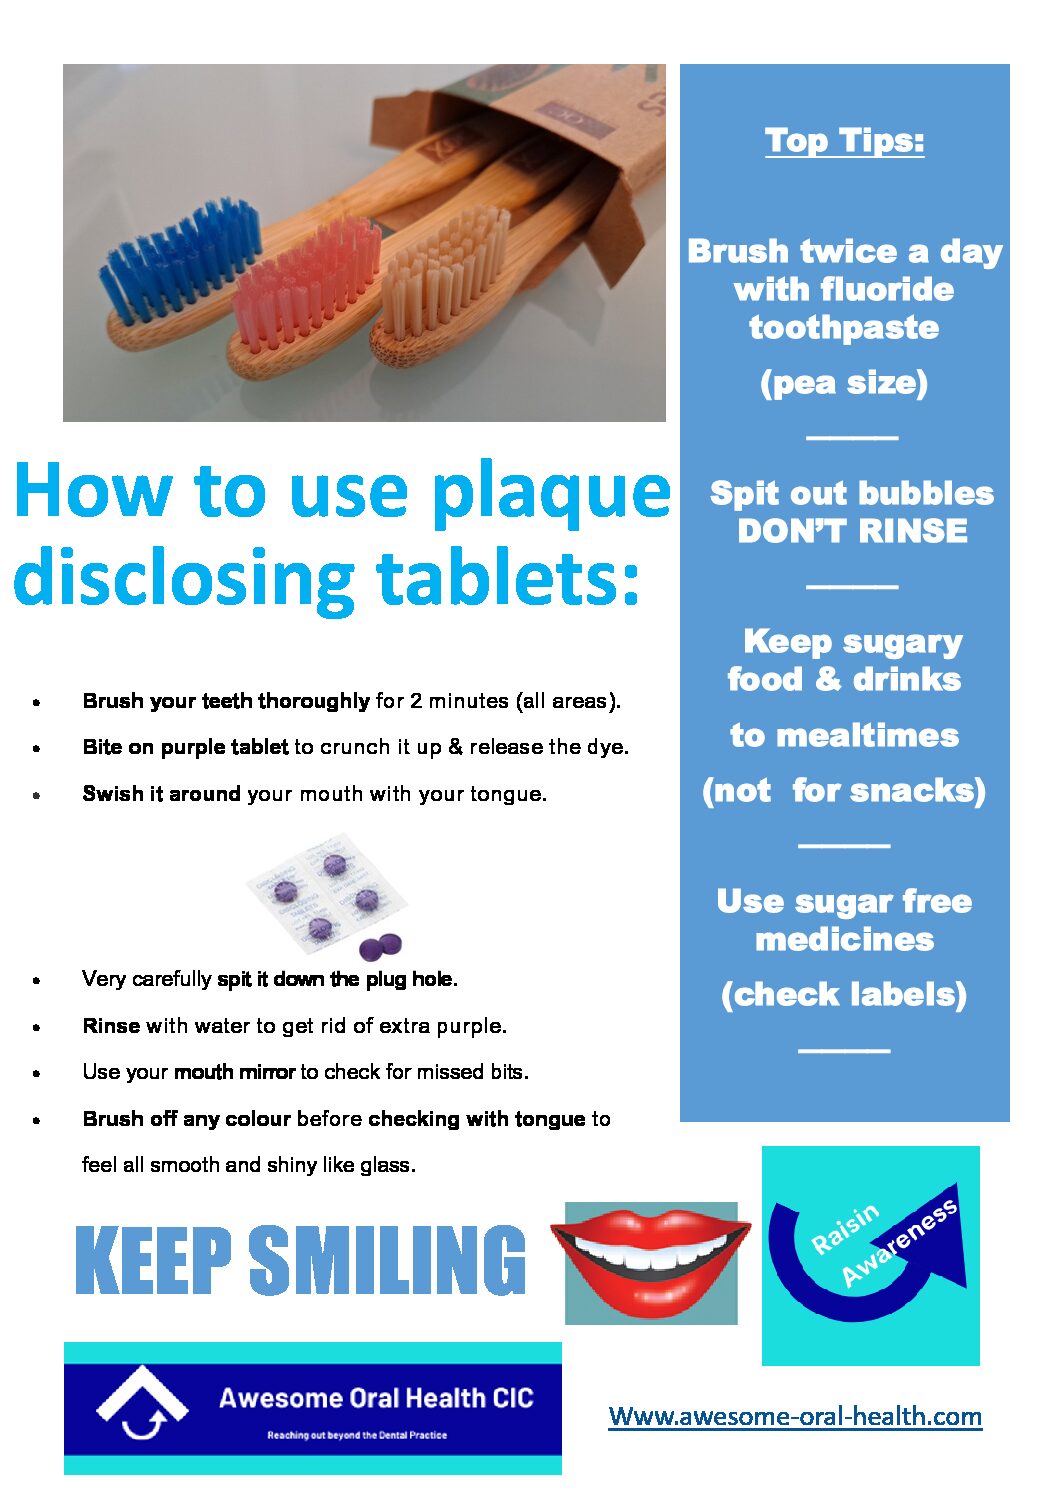 How to use plaque disclosing tablets.